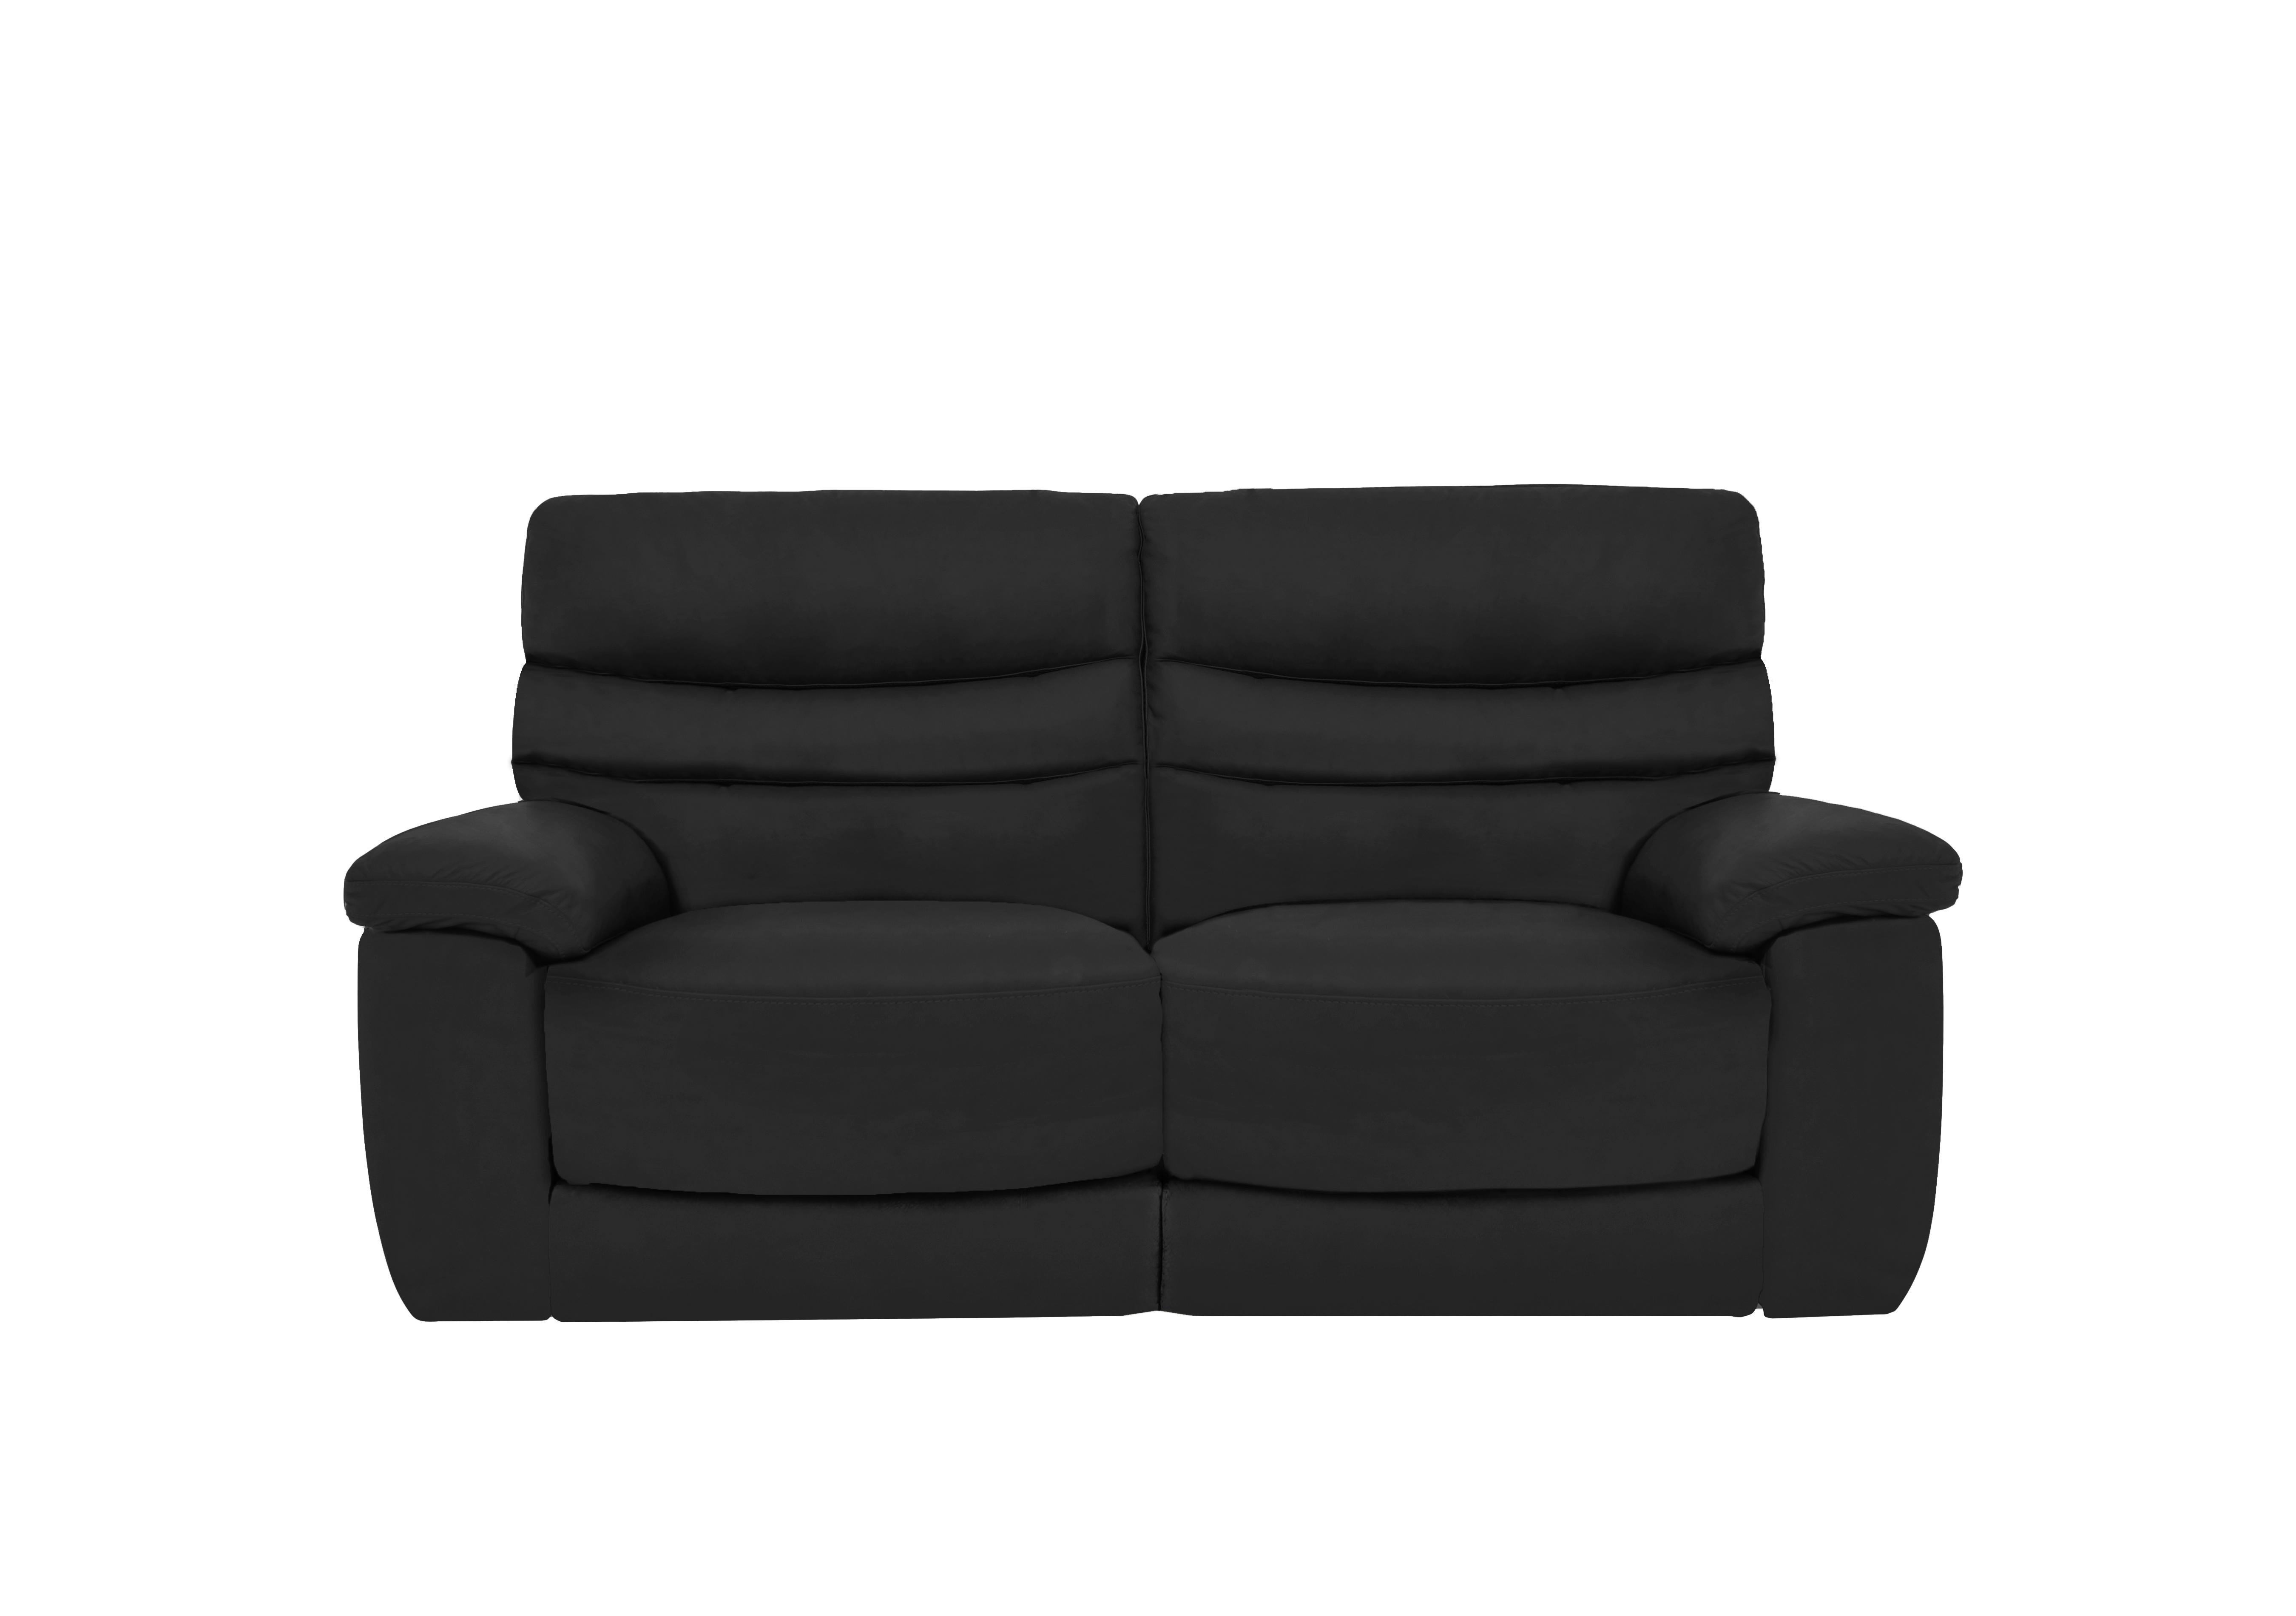 Nimbus 2 Seater Leather Power Recliner Sofa with Power Headrests in Bx-023c Black on Furniture Village